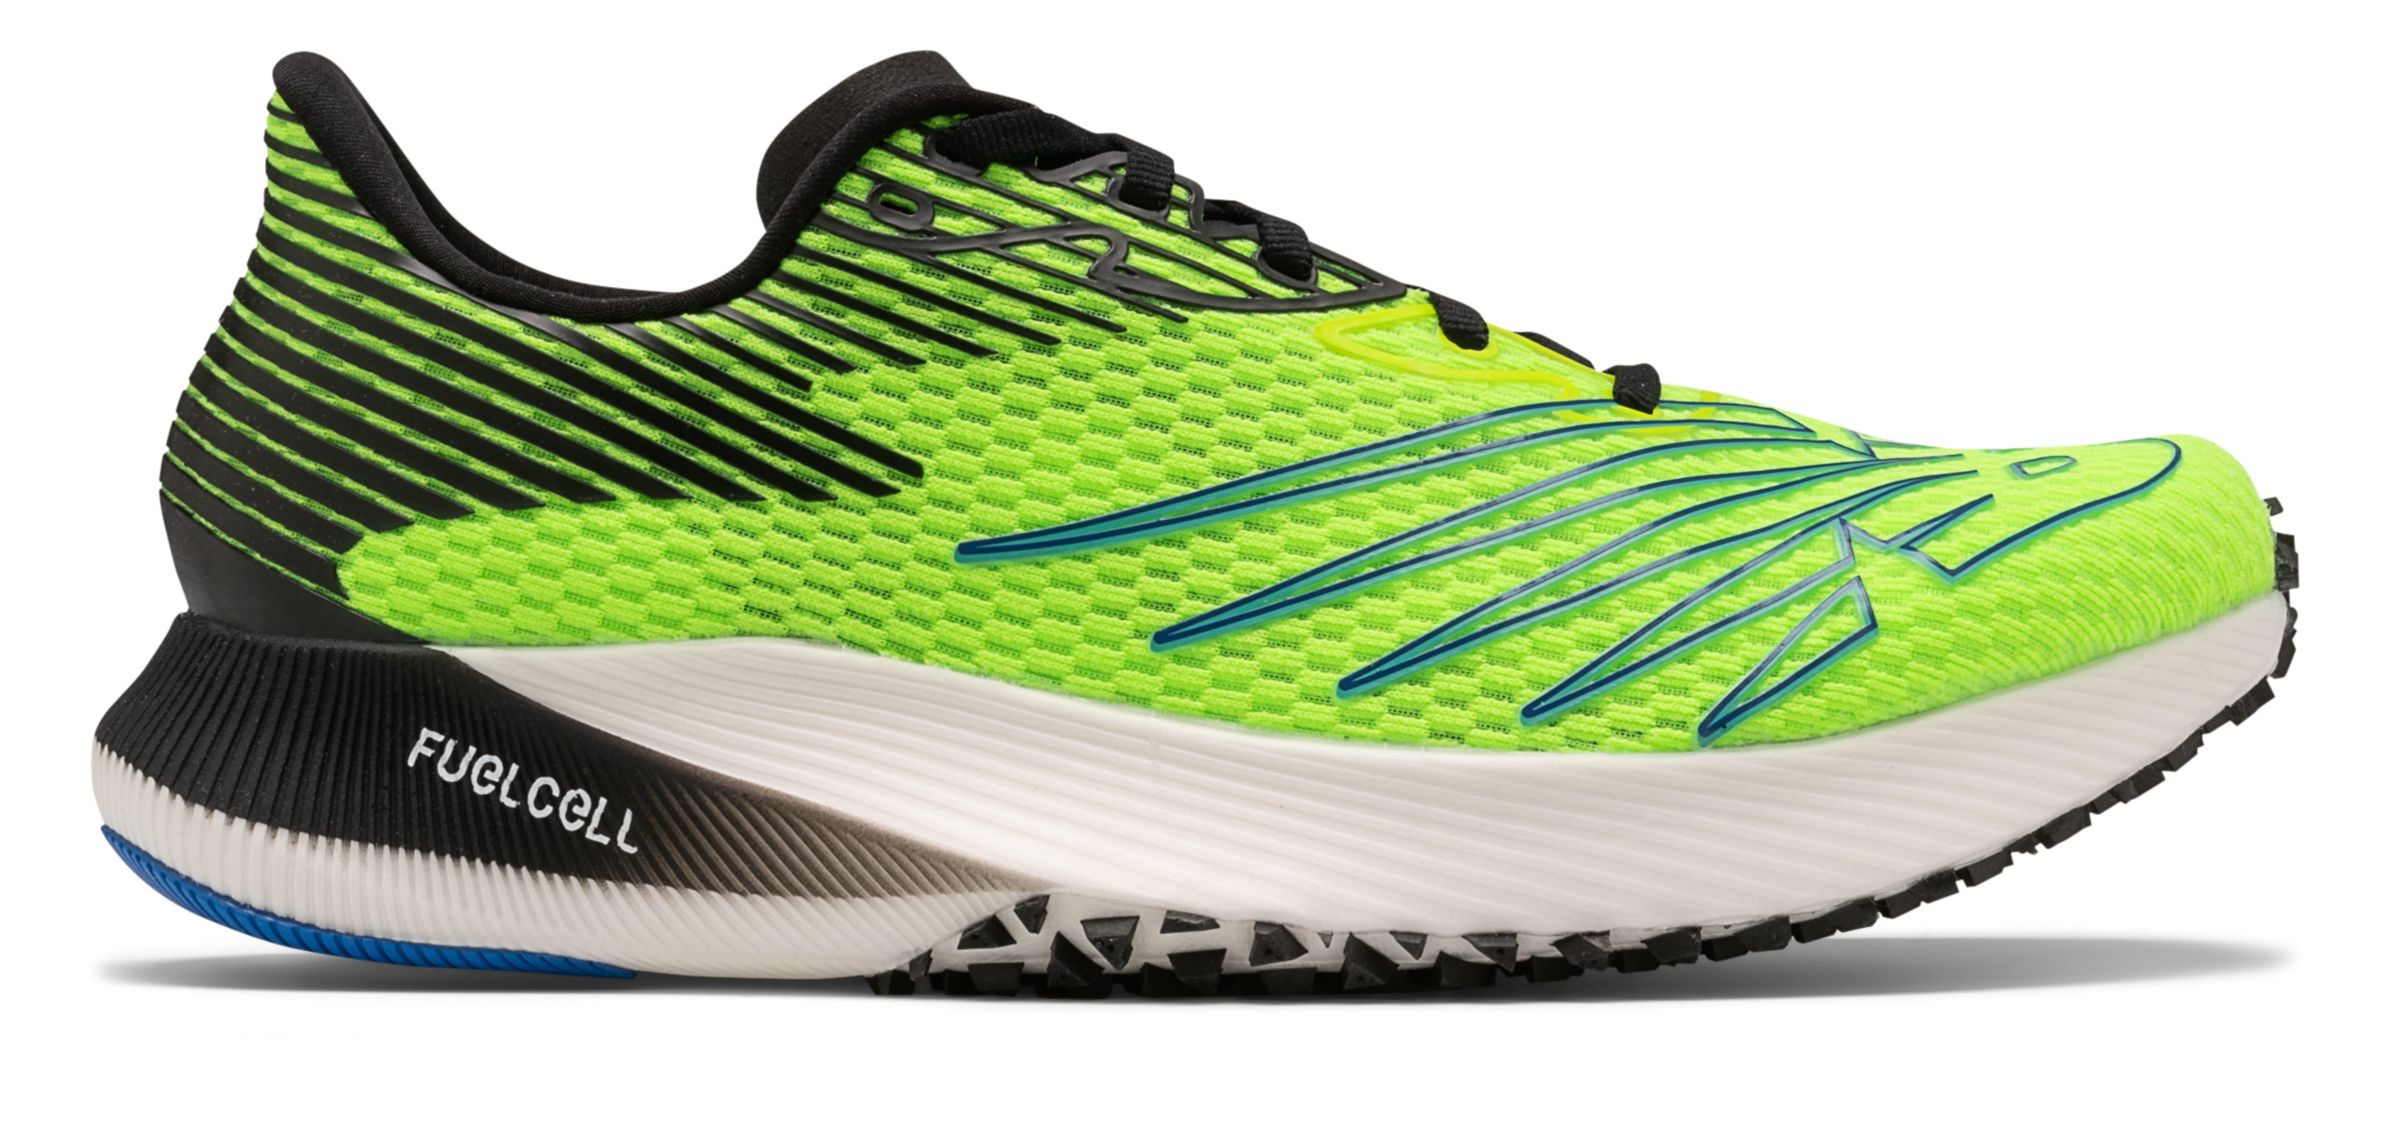 FuelCell RC Elite - New Balance